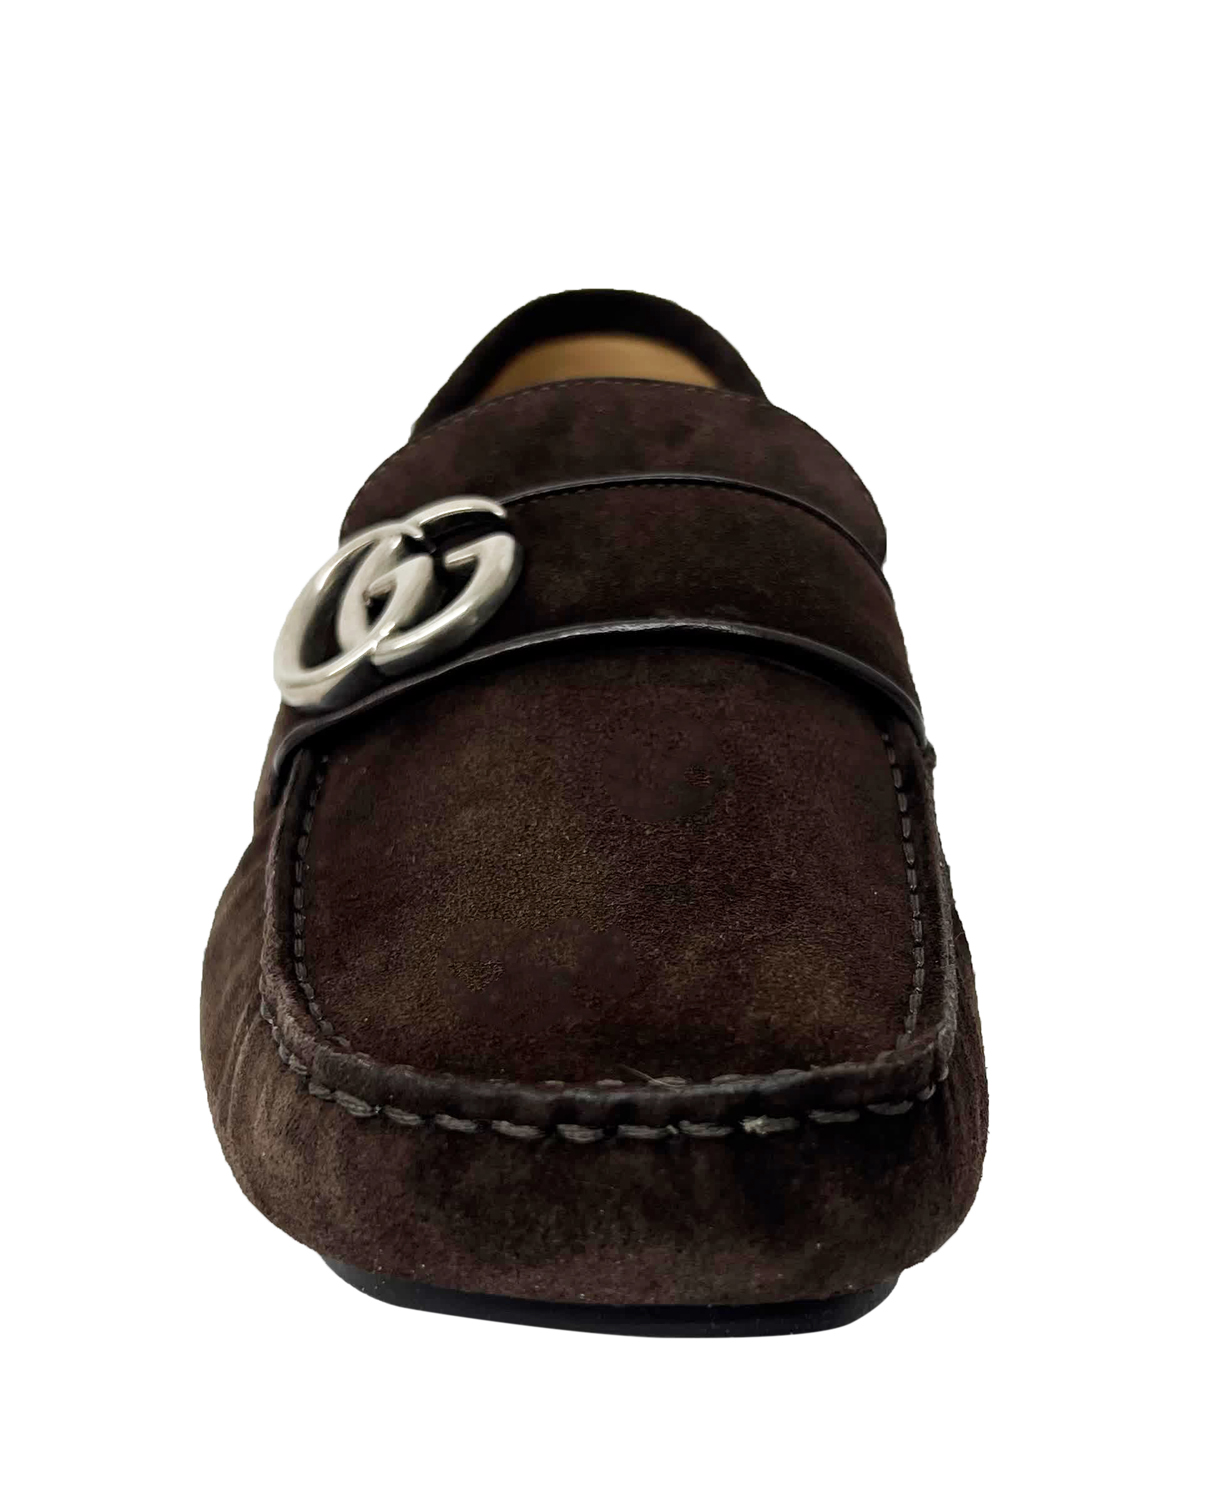 www.couturepoint.com-gucci-mens-brown-leather-praga-slip-on-loafer-shoes-copy